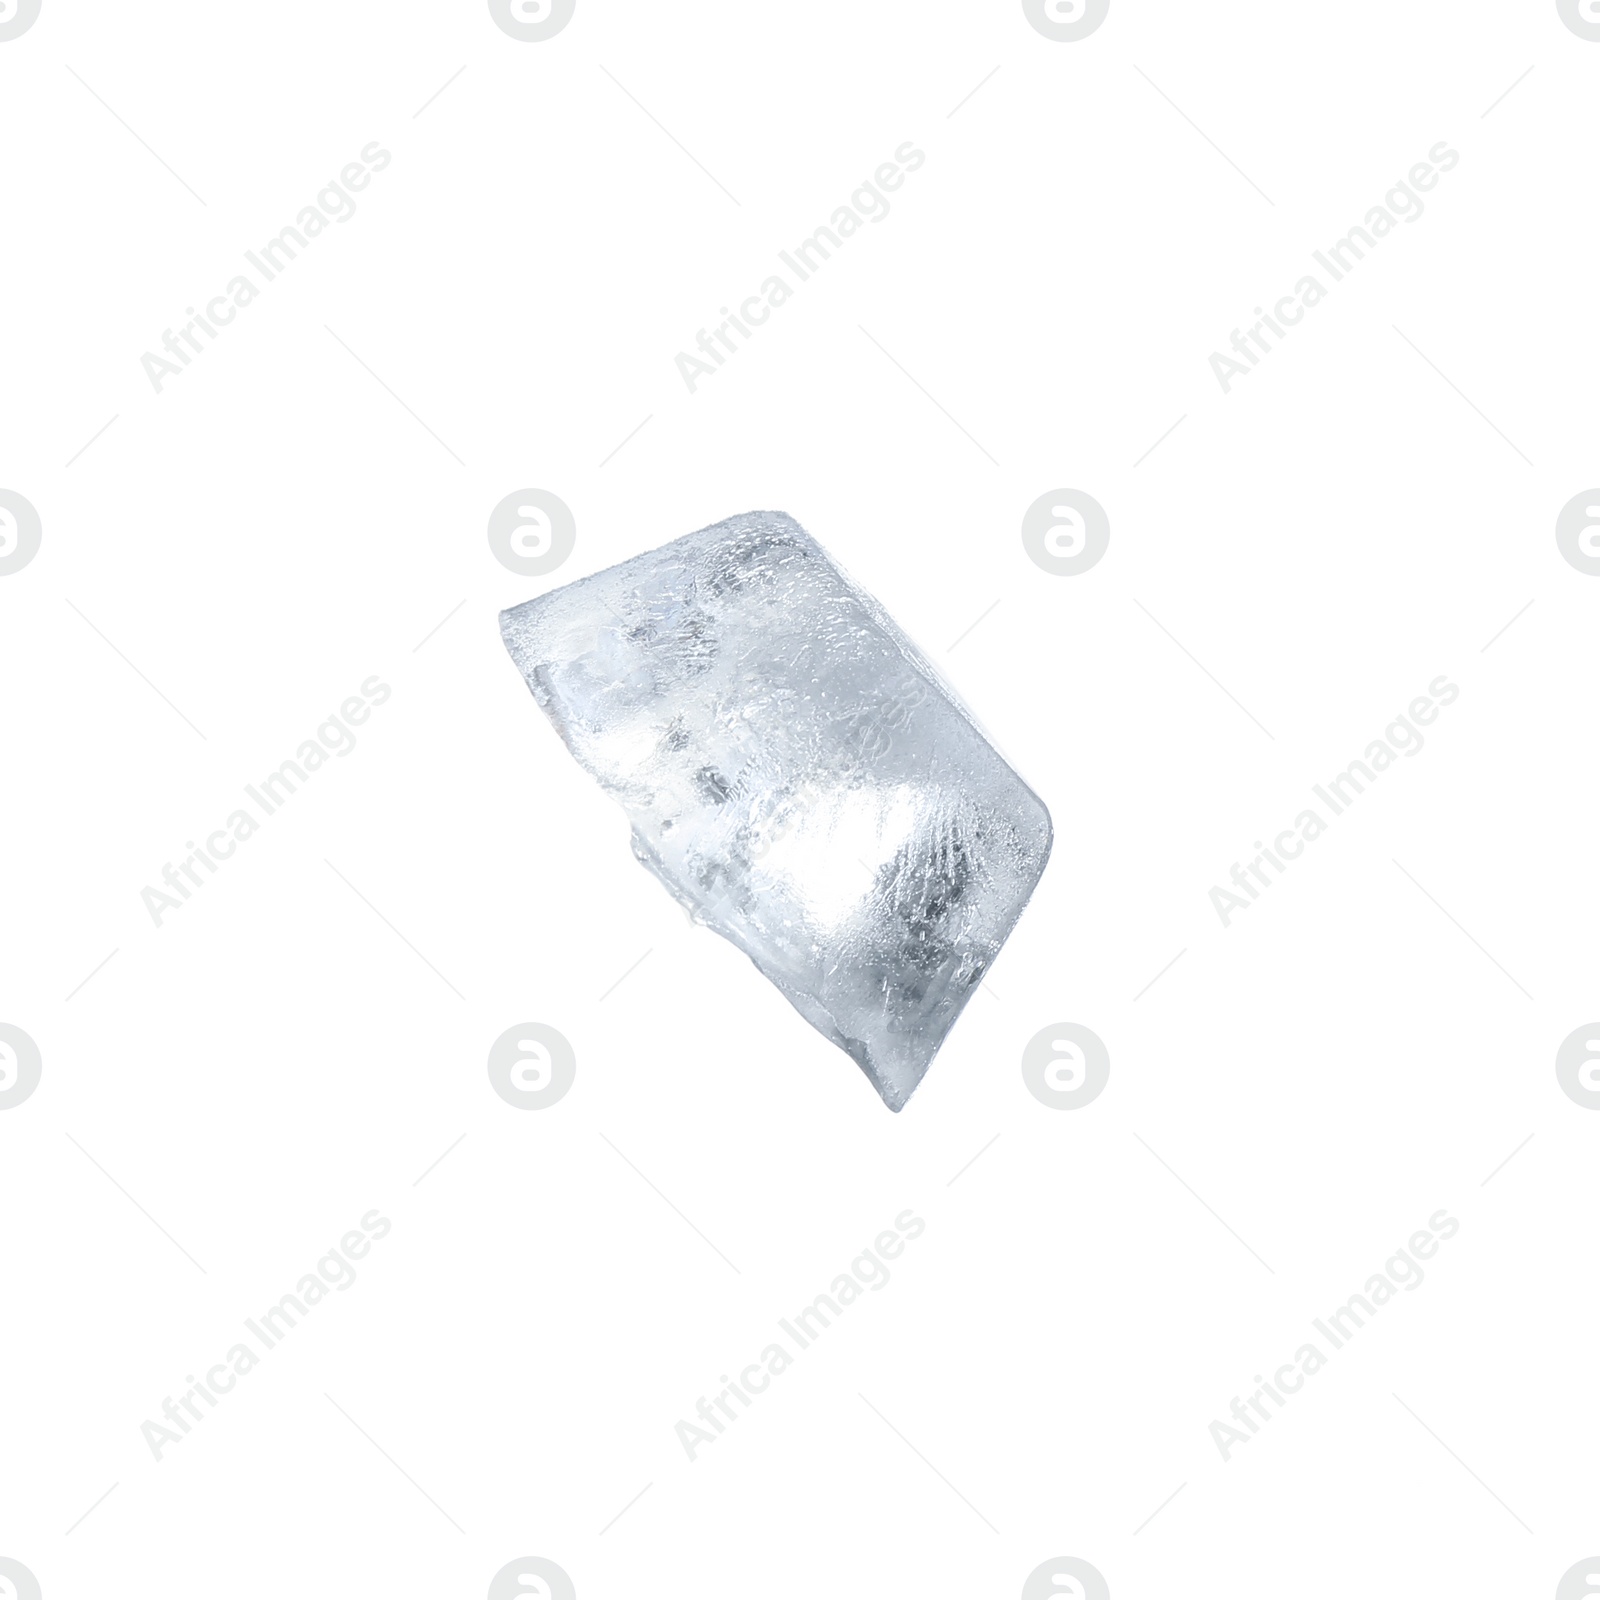 Photo of Crystal clear ice cube isolated on white